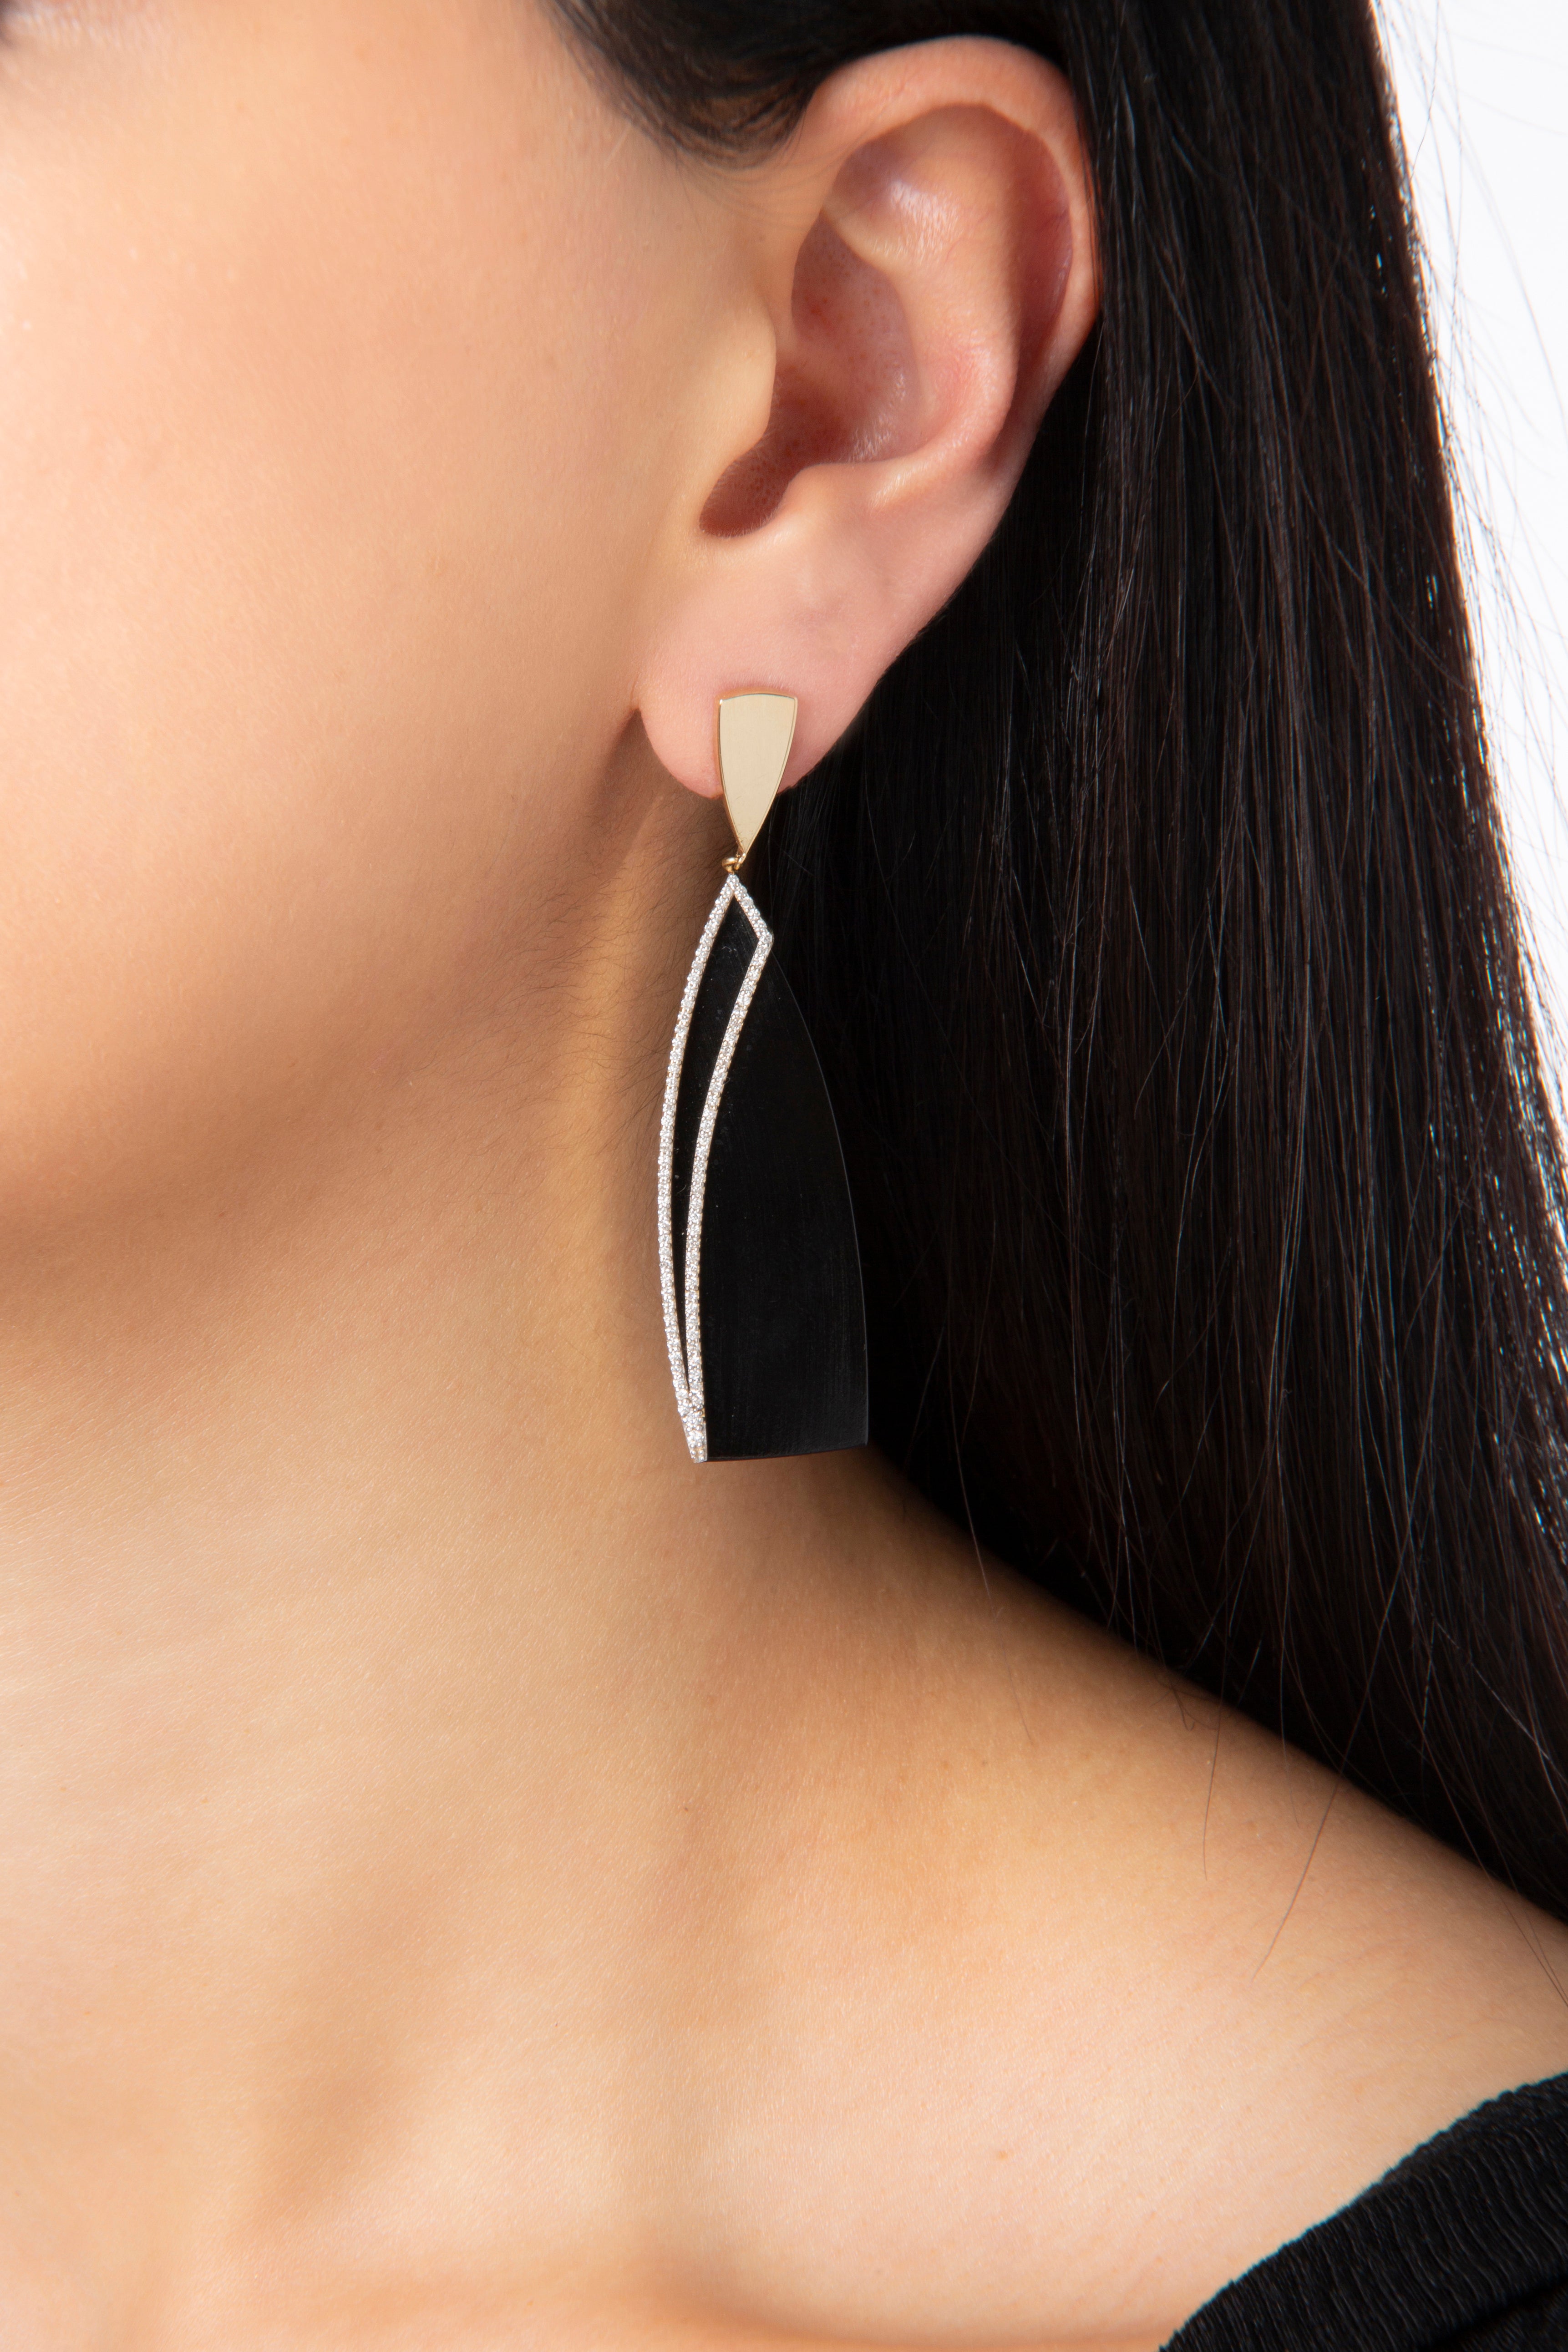 Night Sails Earring in Yellow Gold - Her Story Shop